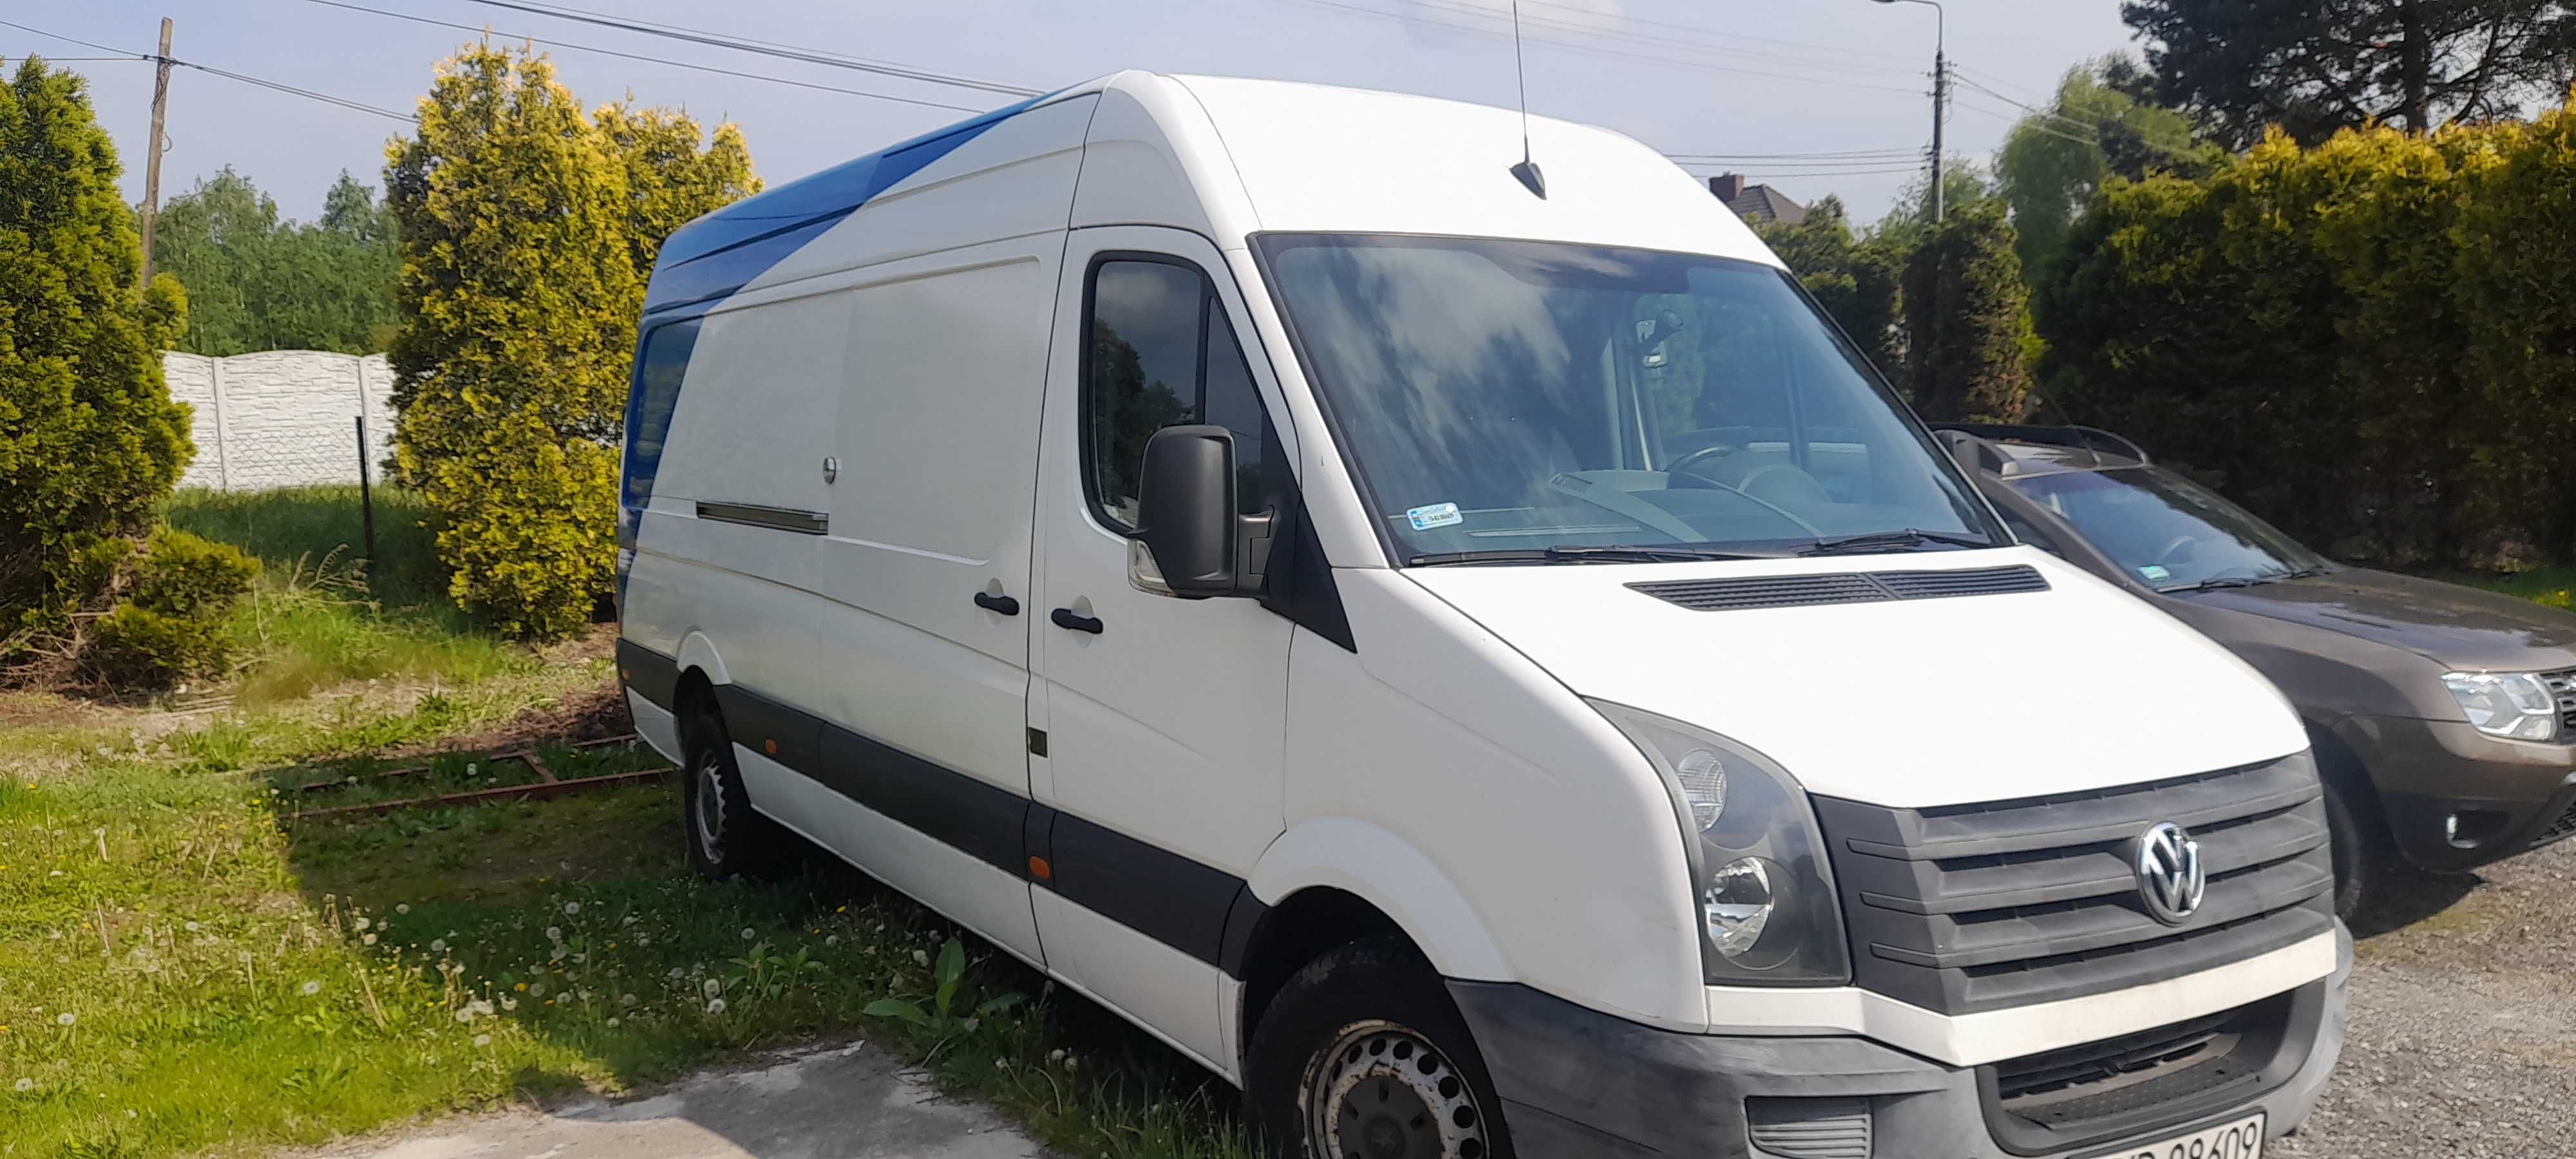 VW Crafter 2011r